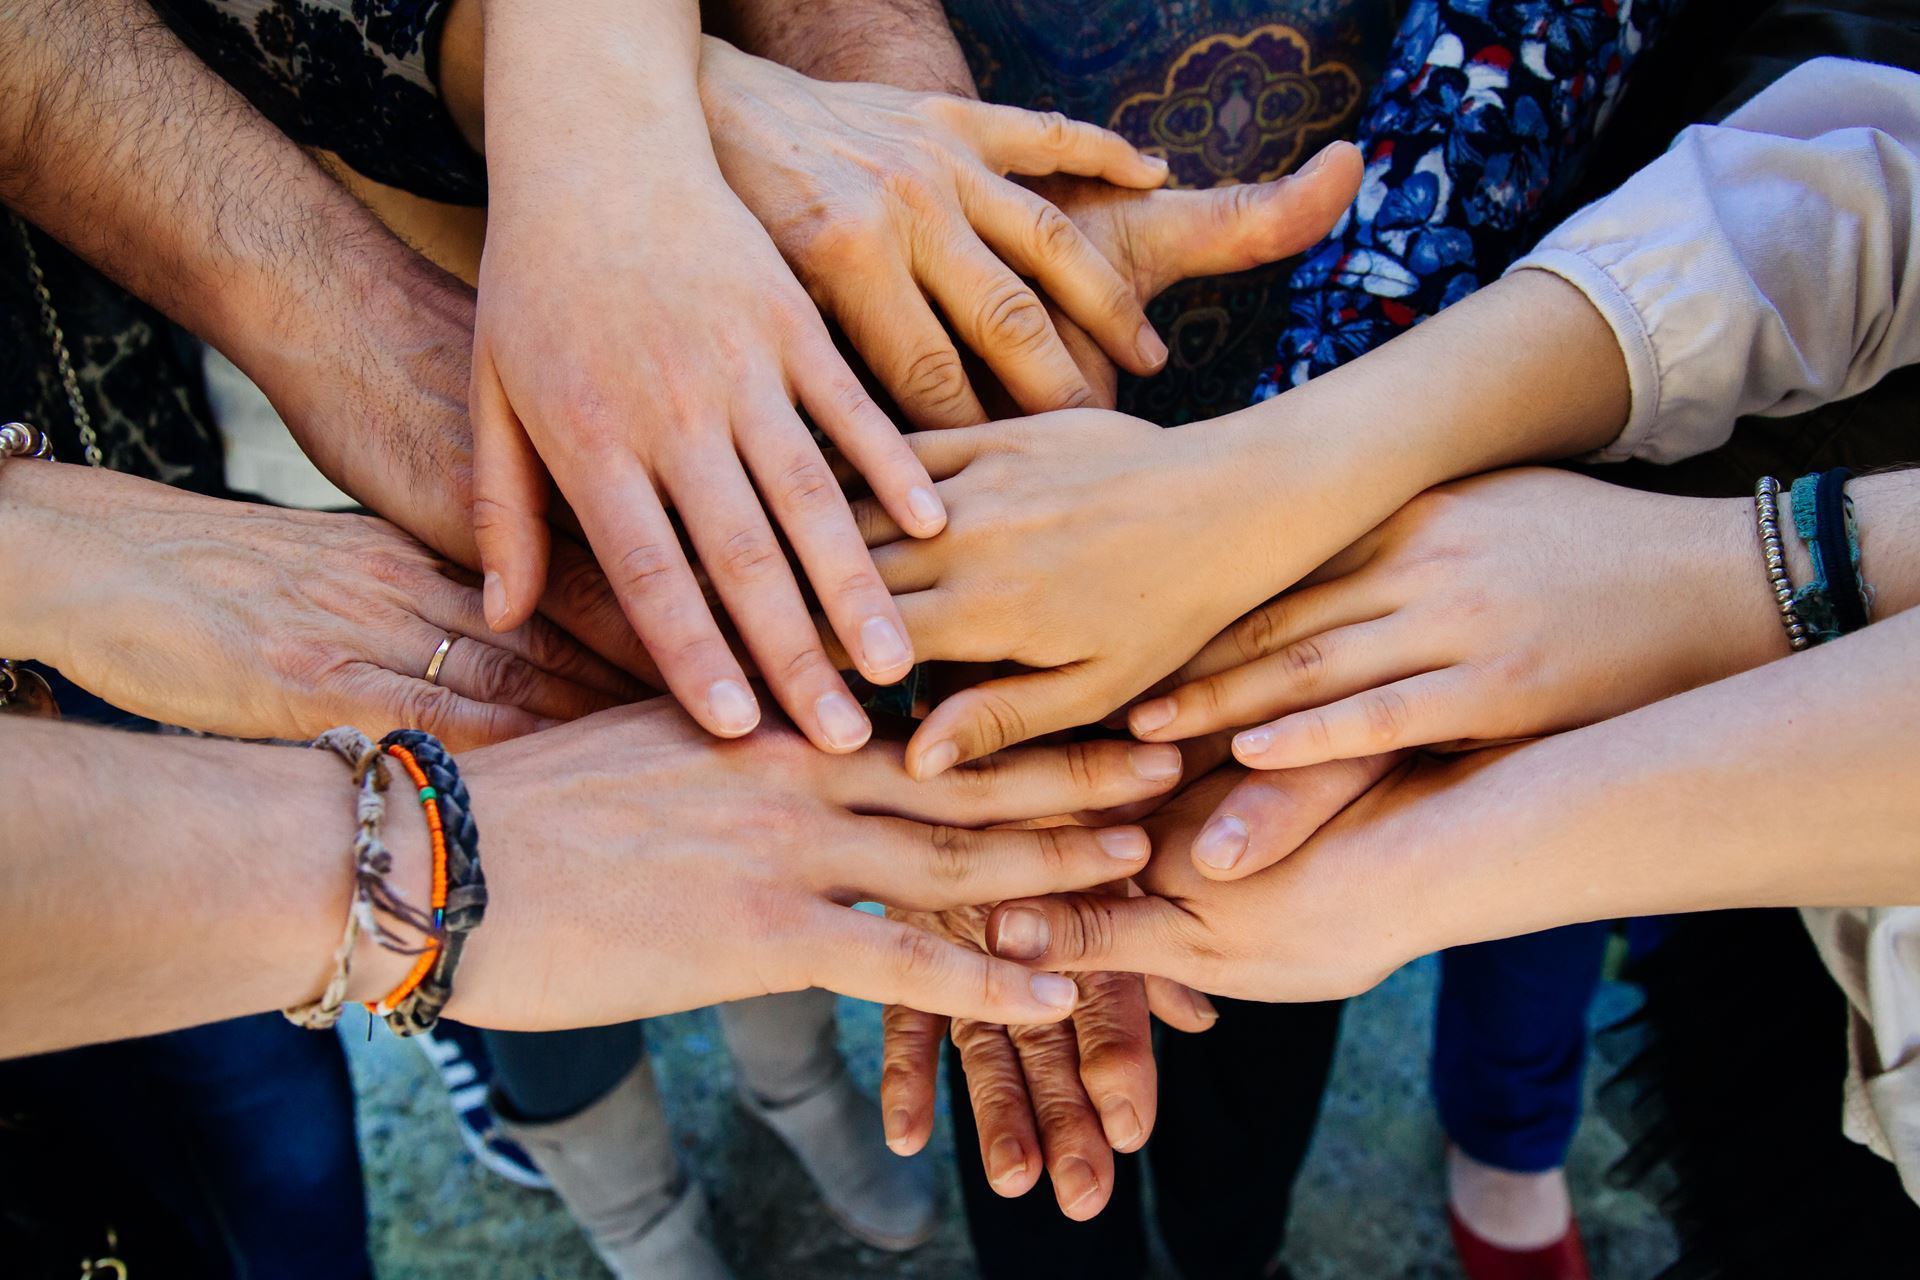 Stock image - hands over hands depicting team work and diversity. 